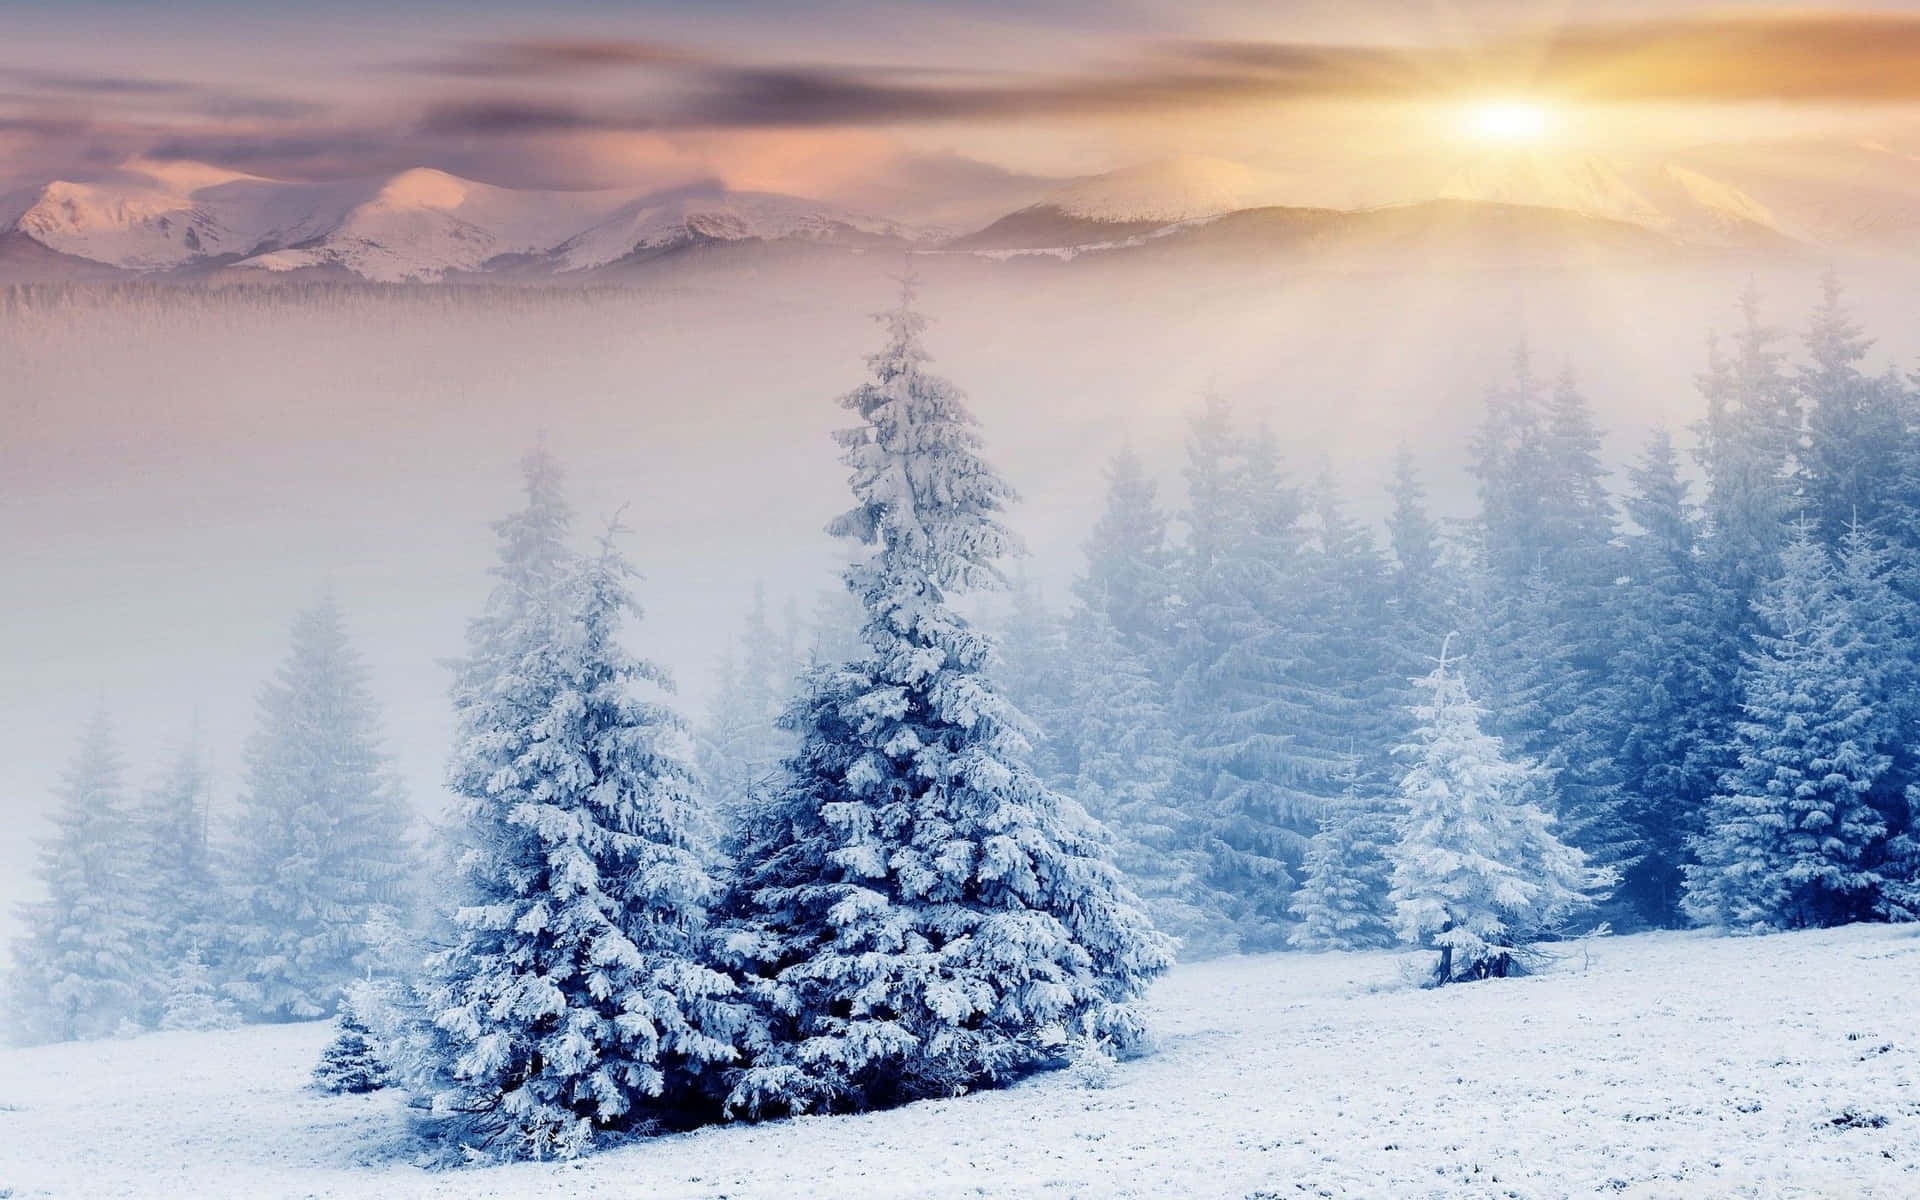 Caption: Experience the Serenity of a Winter Wonderland Wallpaper